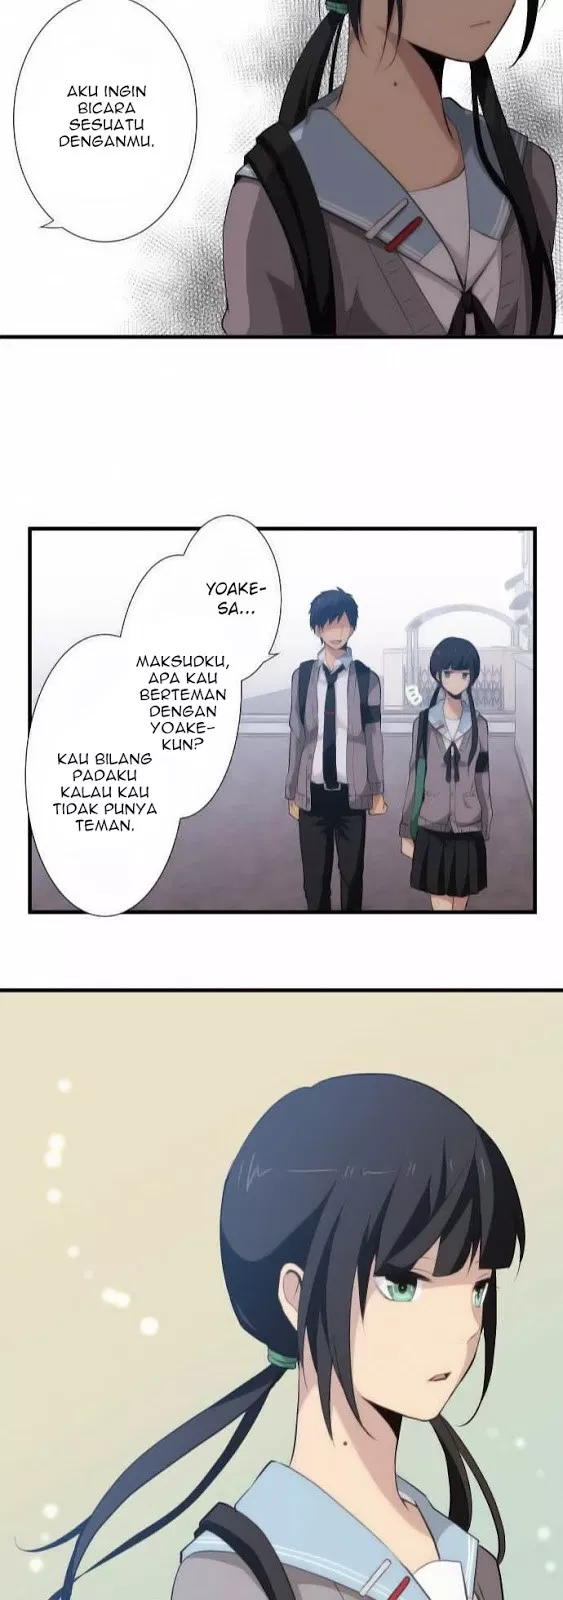 ReLIFE Chapter 55